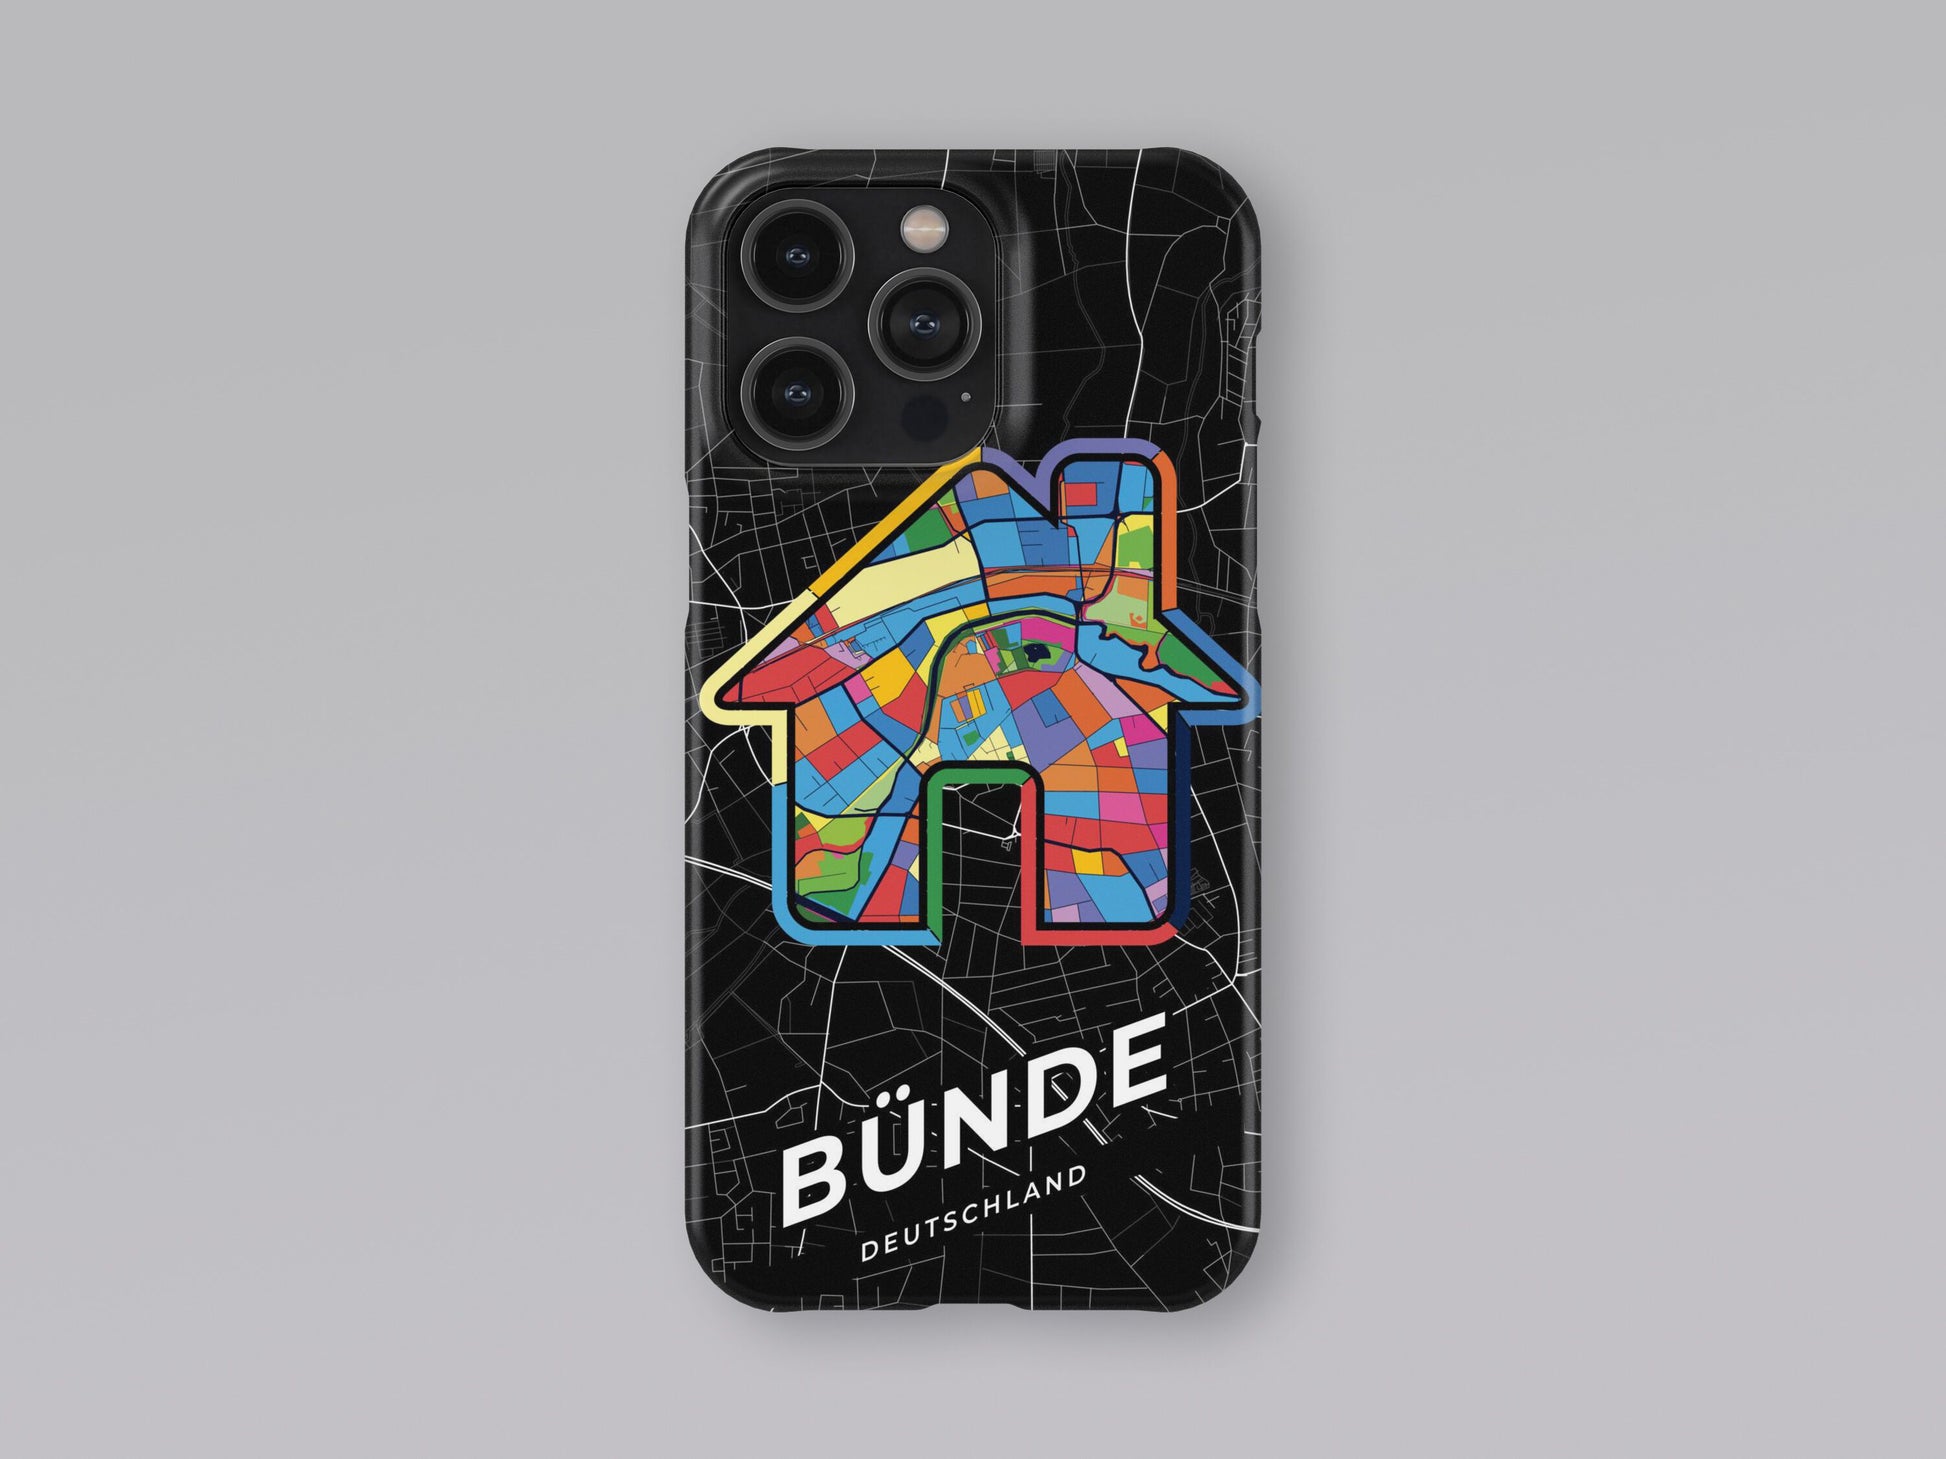 Bünde Deutschland slim phone case with colorful icon. Birthday, wedding or housewarming gift. Couple match cases. 3